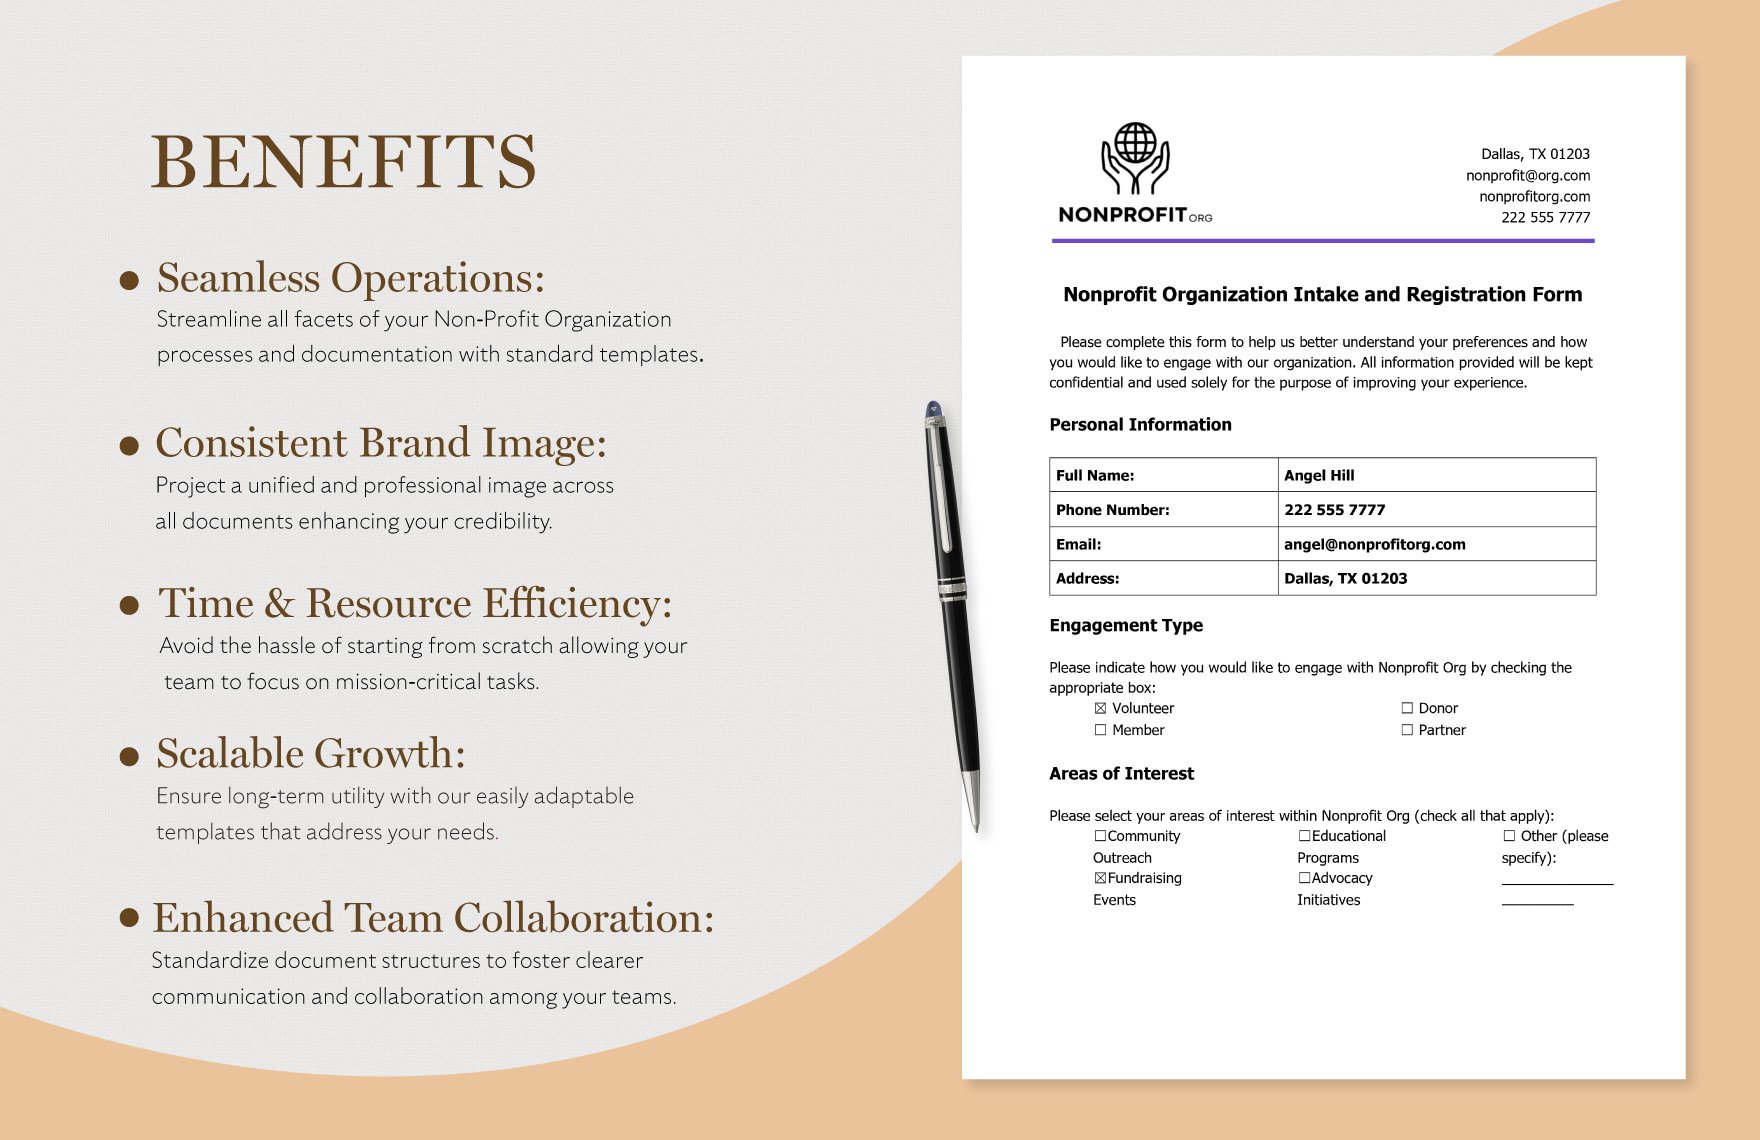 Nonprofit Organization Intake and Registration Form Template